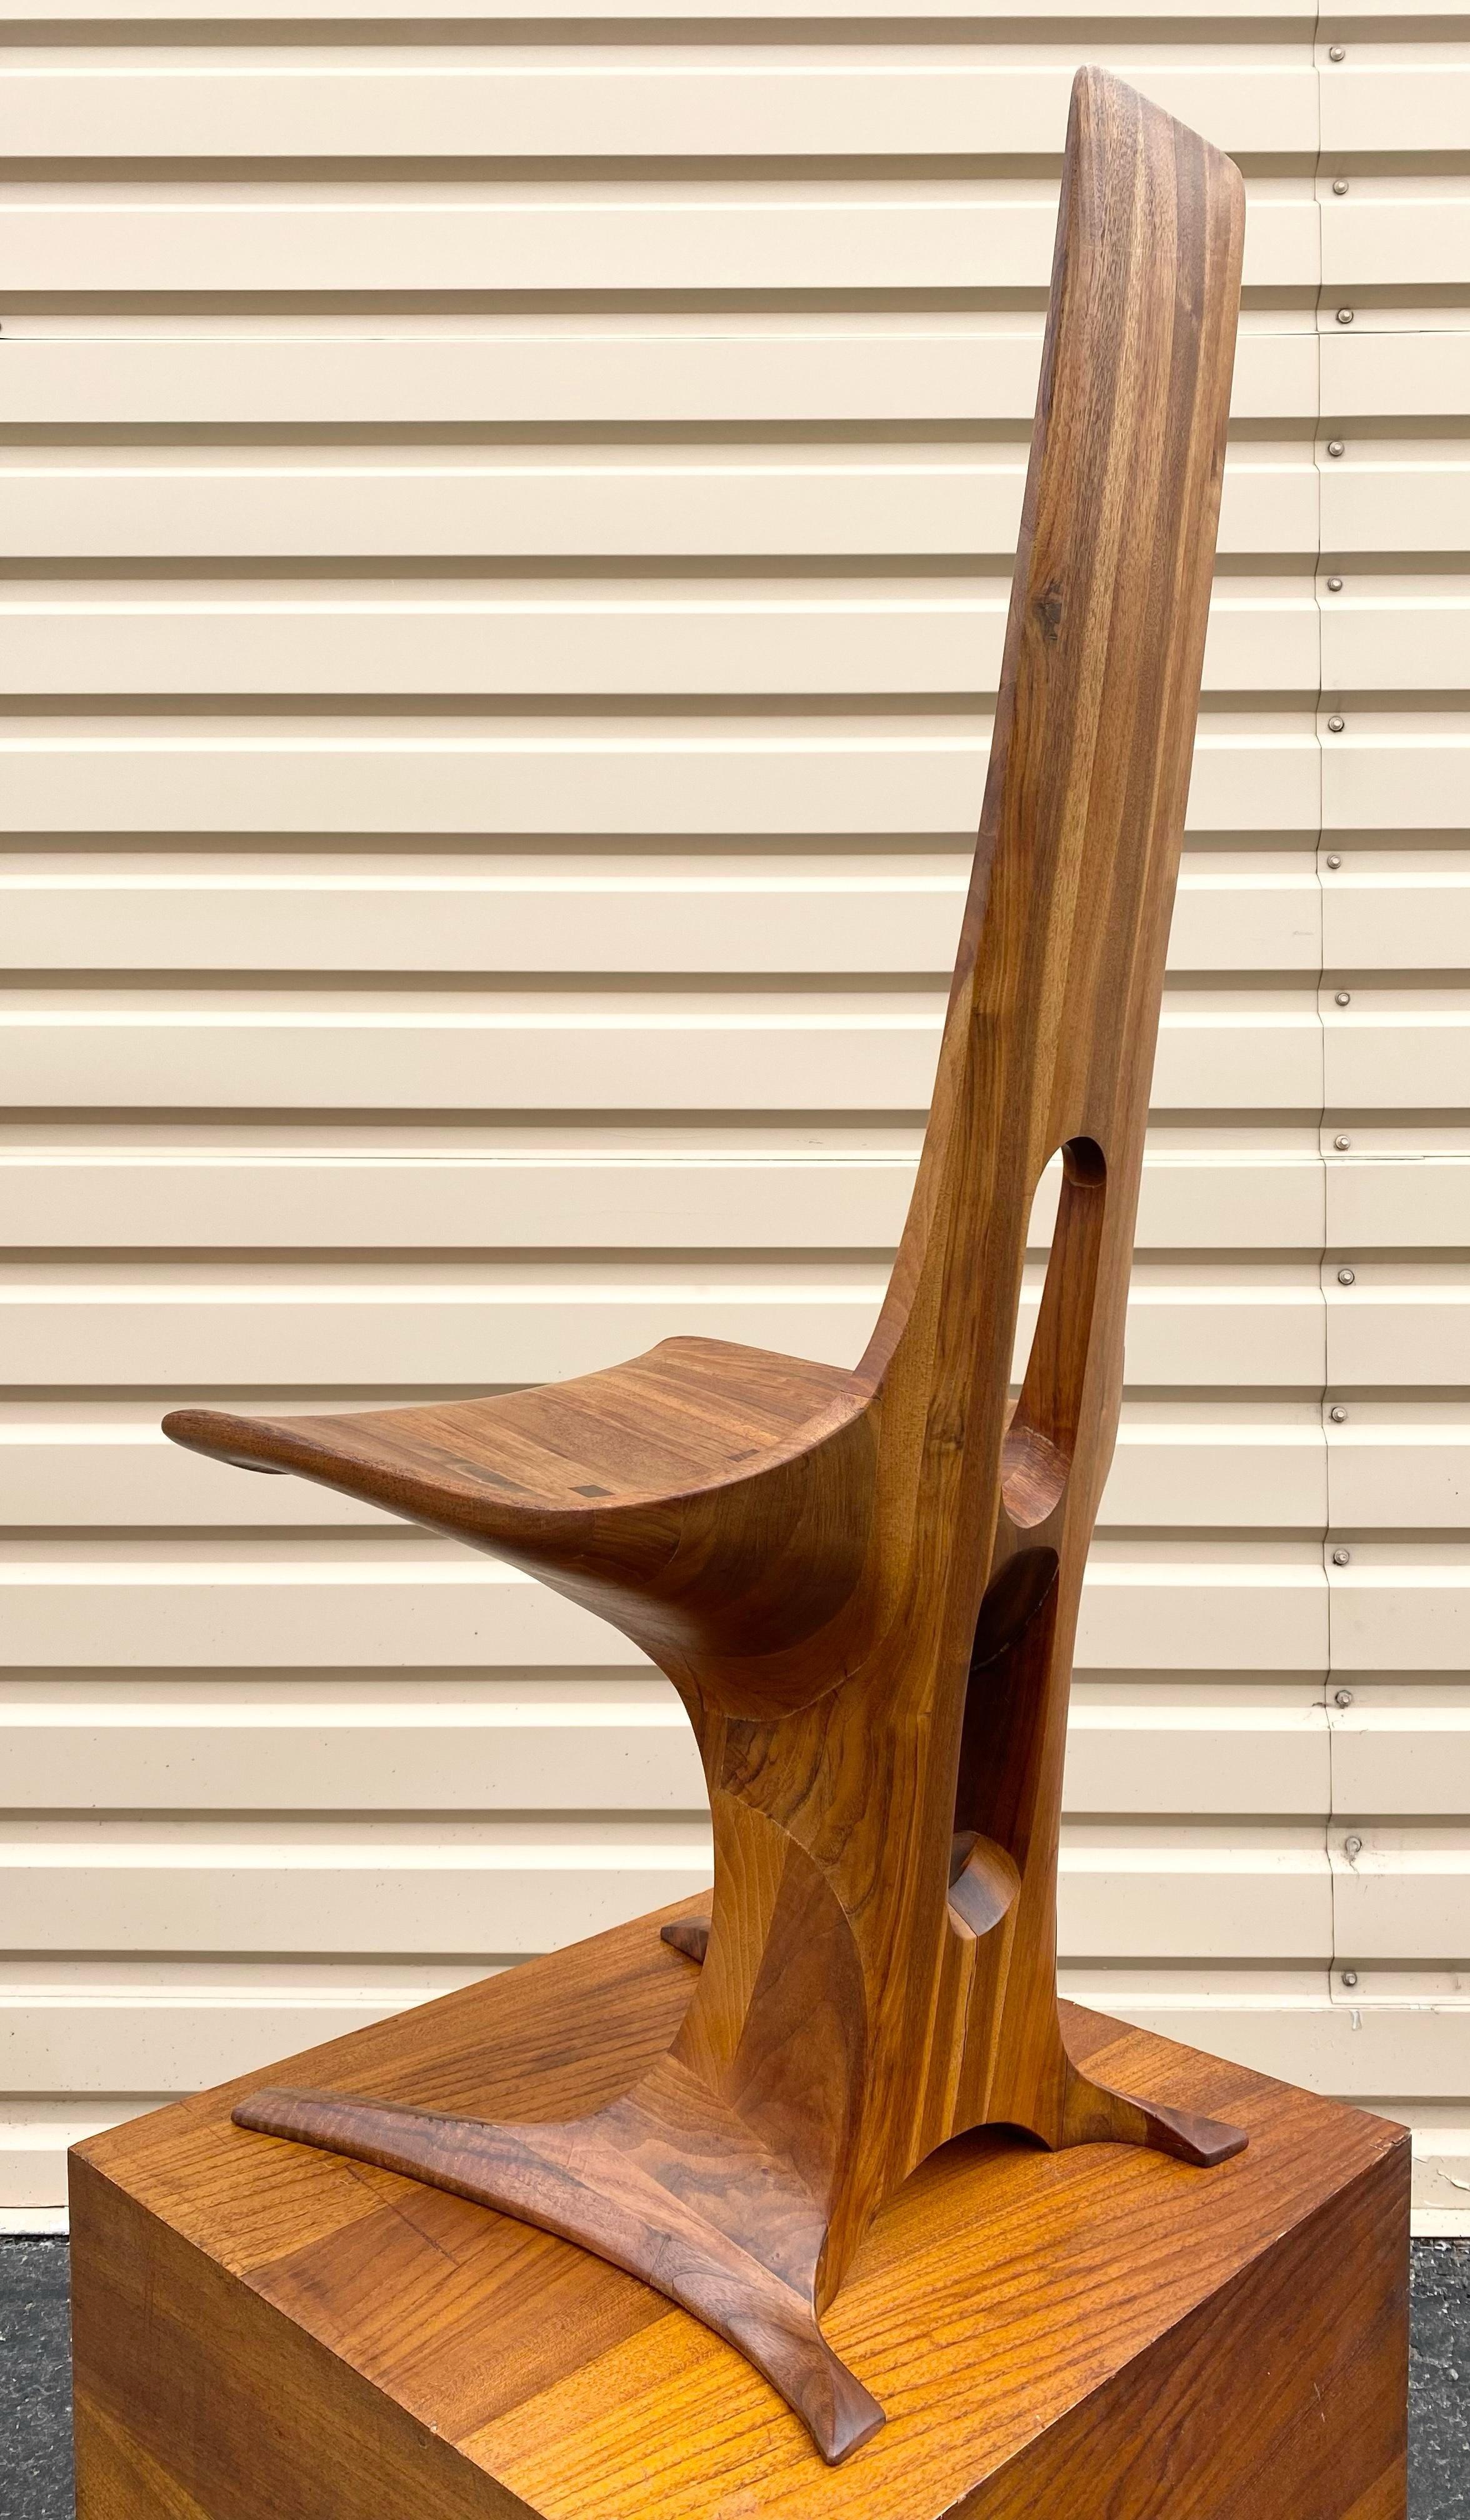 Modernist Sculptural Walnut Chair by Edward G. Livingston for Archotypo (1970) For Sale 4